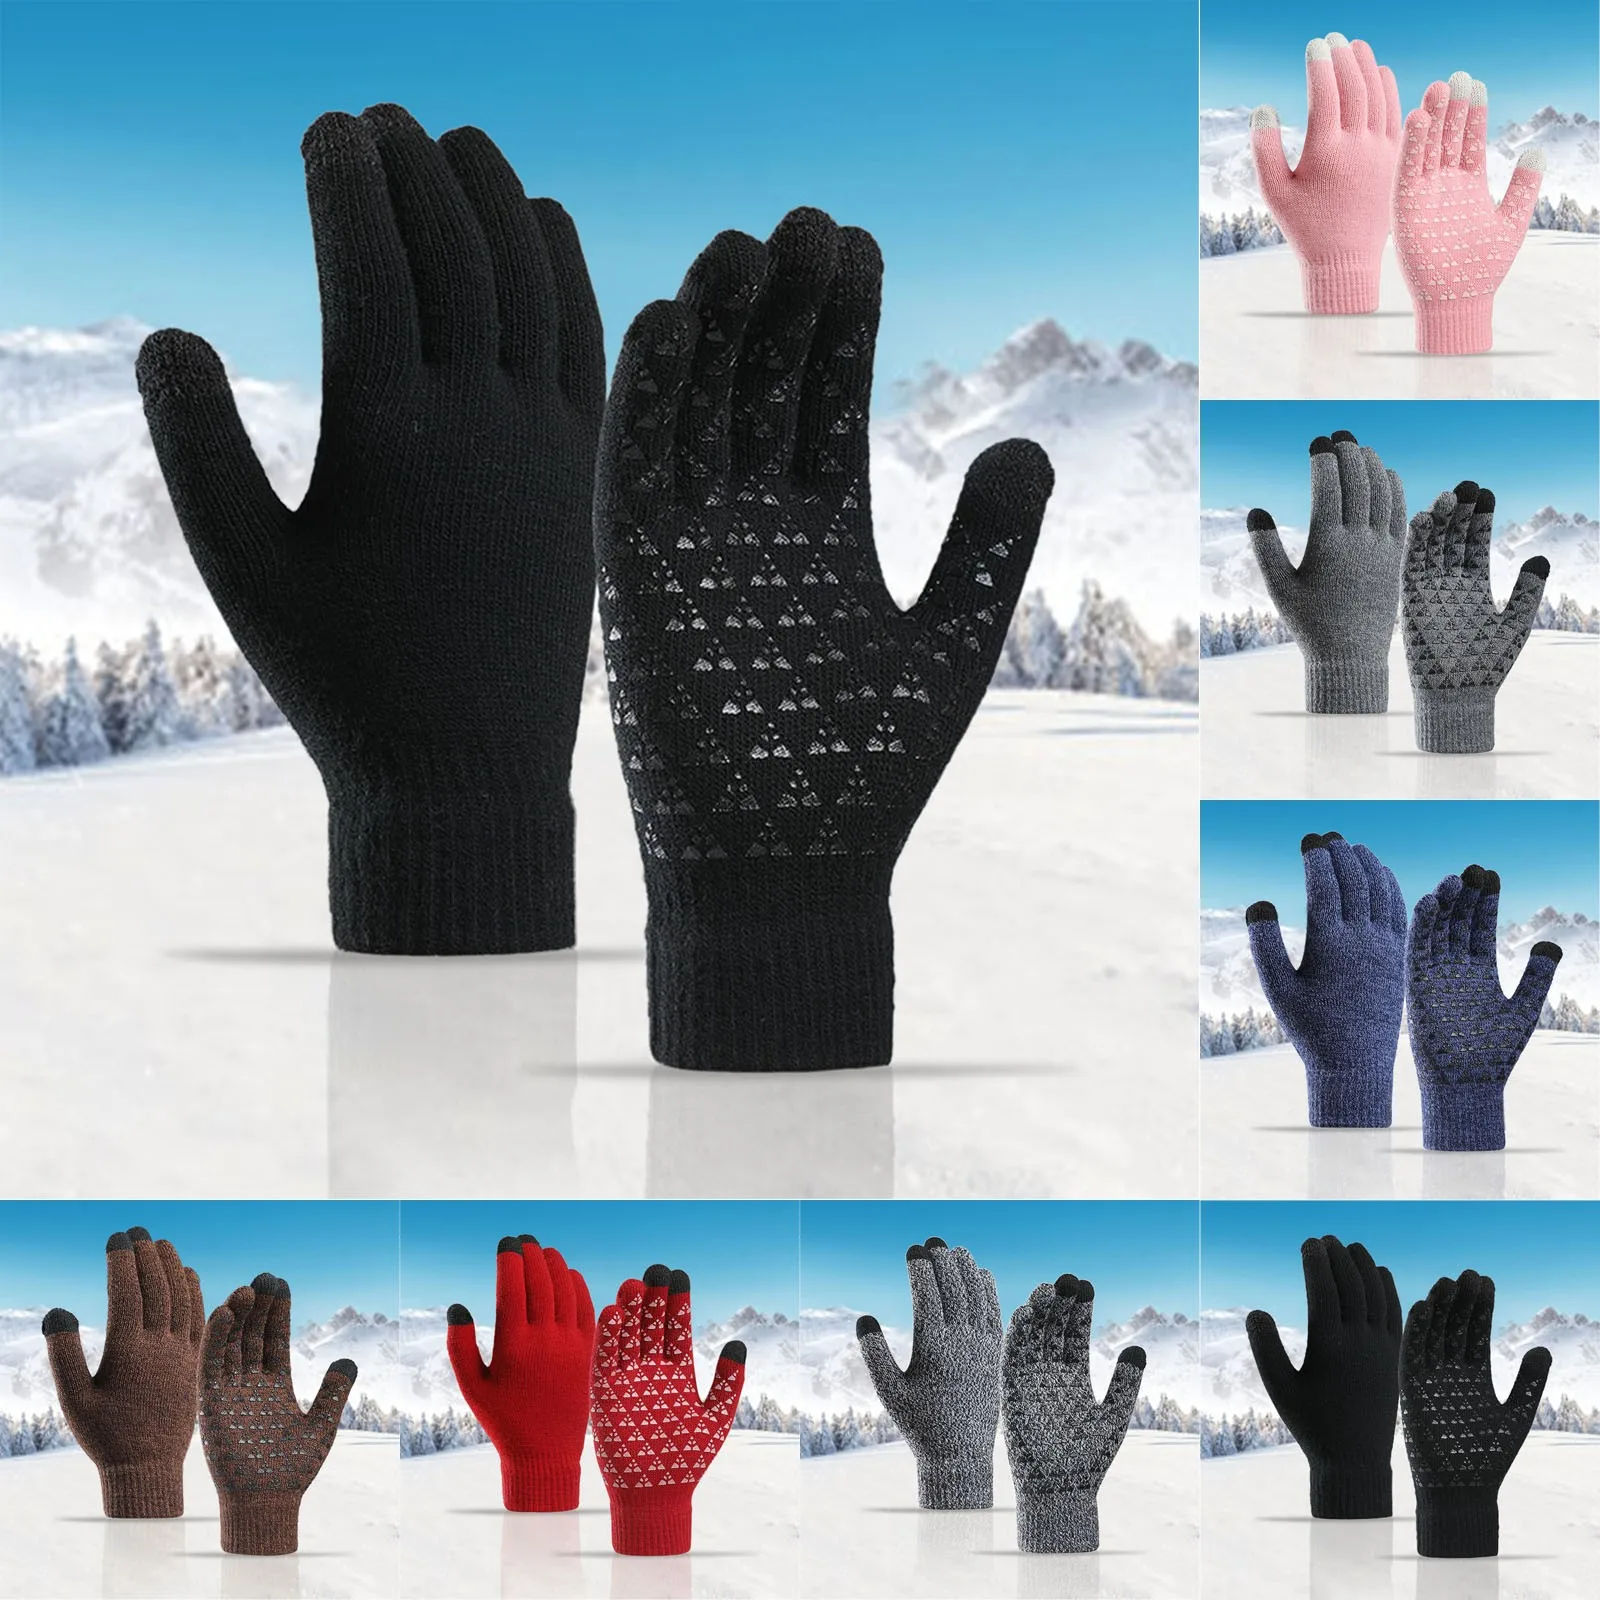 

Winter Upgraded Touch-screen Anti-slip Gloves Elastic Cuff Thermal Soft Knit Lining Gloves For Men Women Guantes Invierno